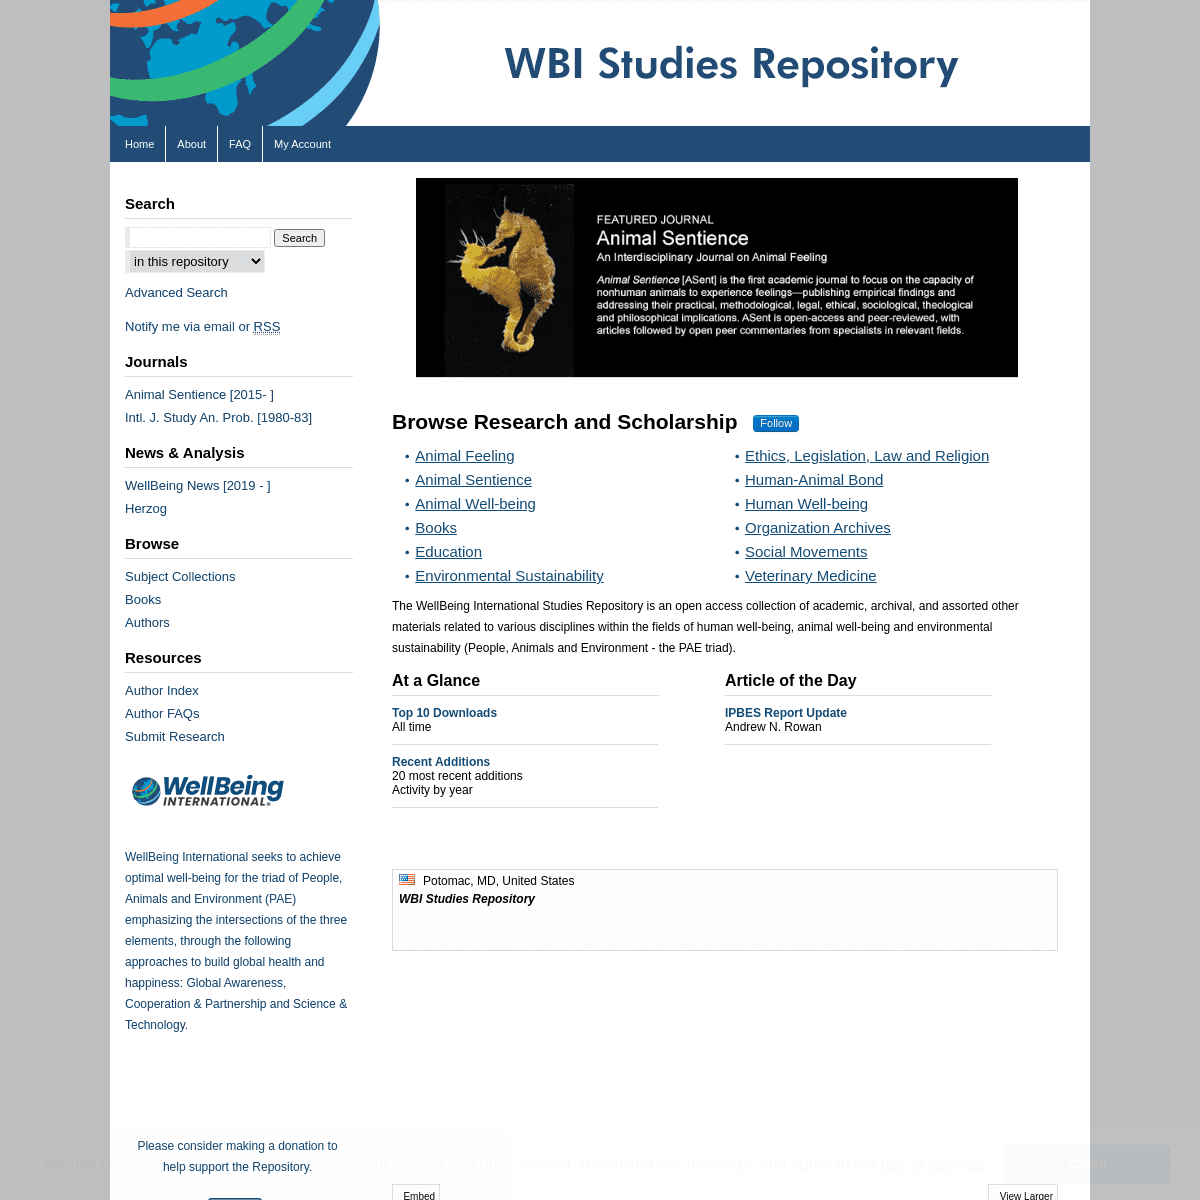 A complete backup of https://animalstudiesrepository.org